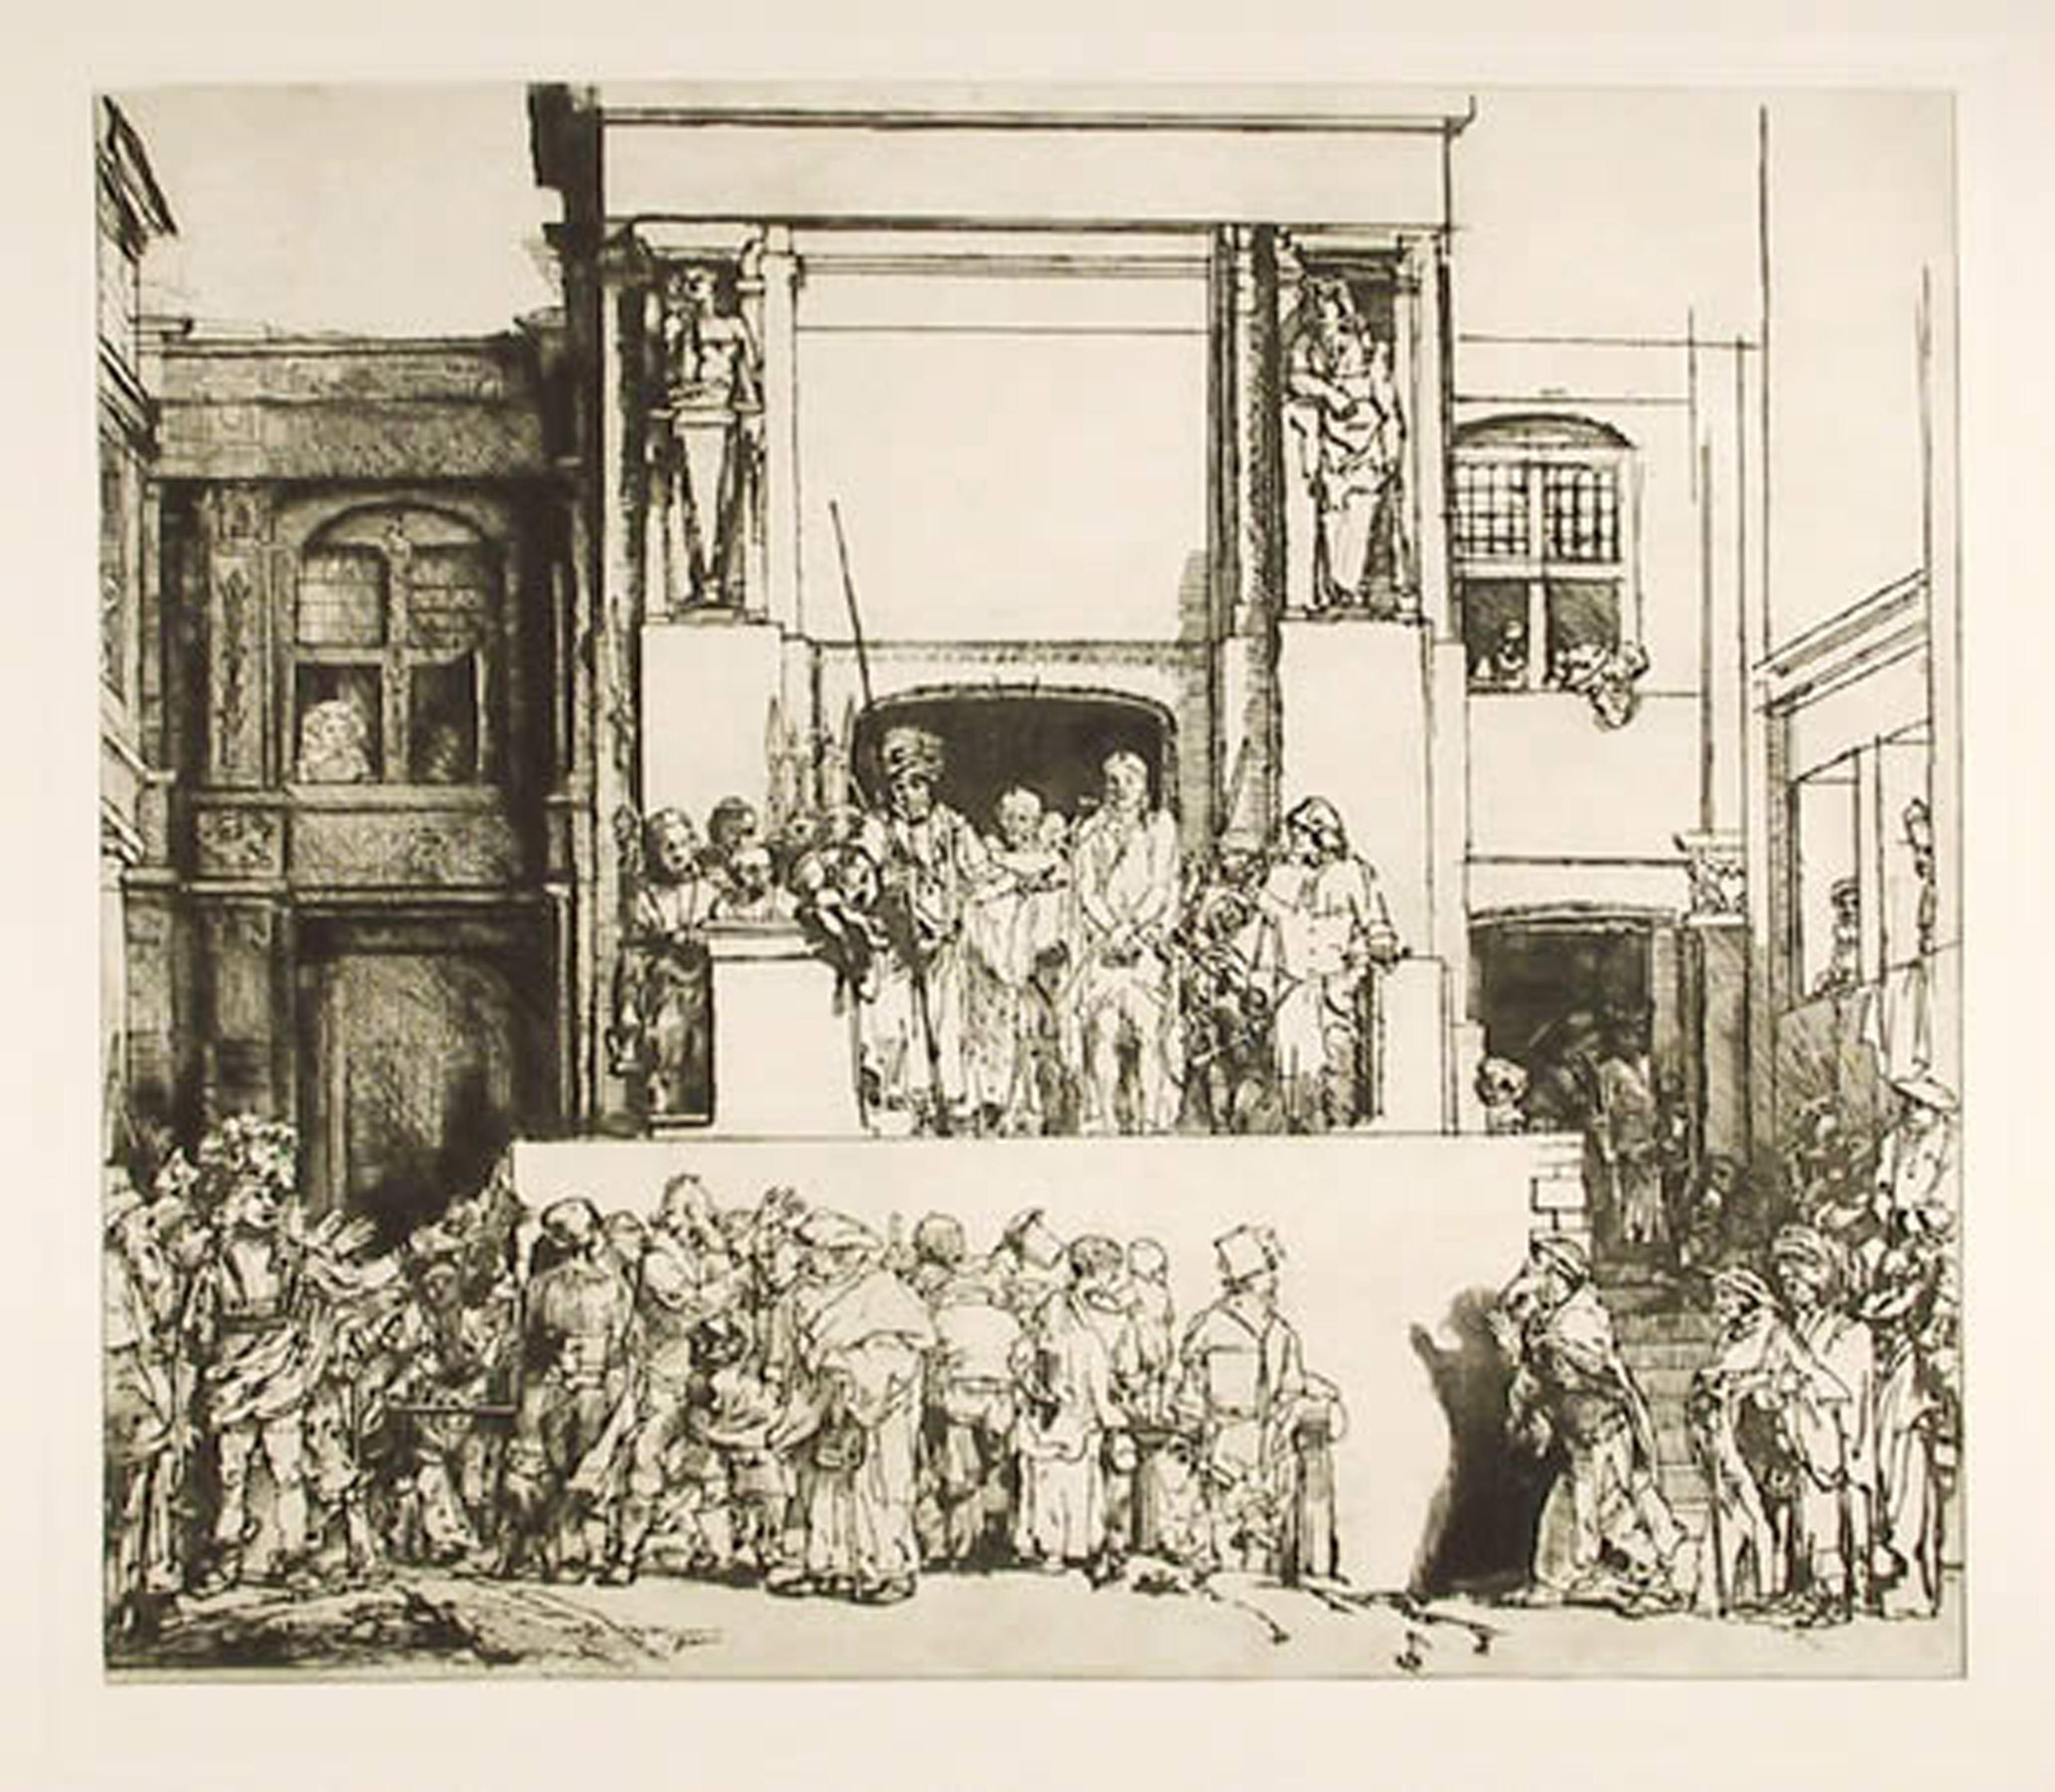  Rembrandt van Rijn, After by Amand Durand, Dutch (1606 - 1669) - Christ presented to the people, Year: of Original 1655, Medium: Etching, Image Size: 15.5 x 18 inches, Size: 22  x 25 in. (55.88  x 63.5 cm), Printer: Amand Durand, Description: